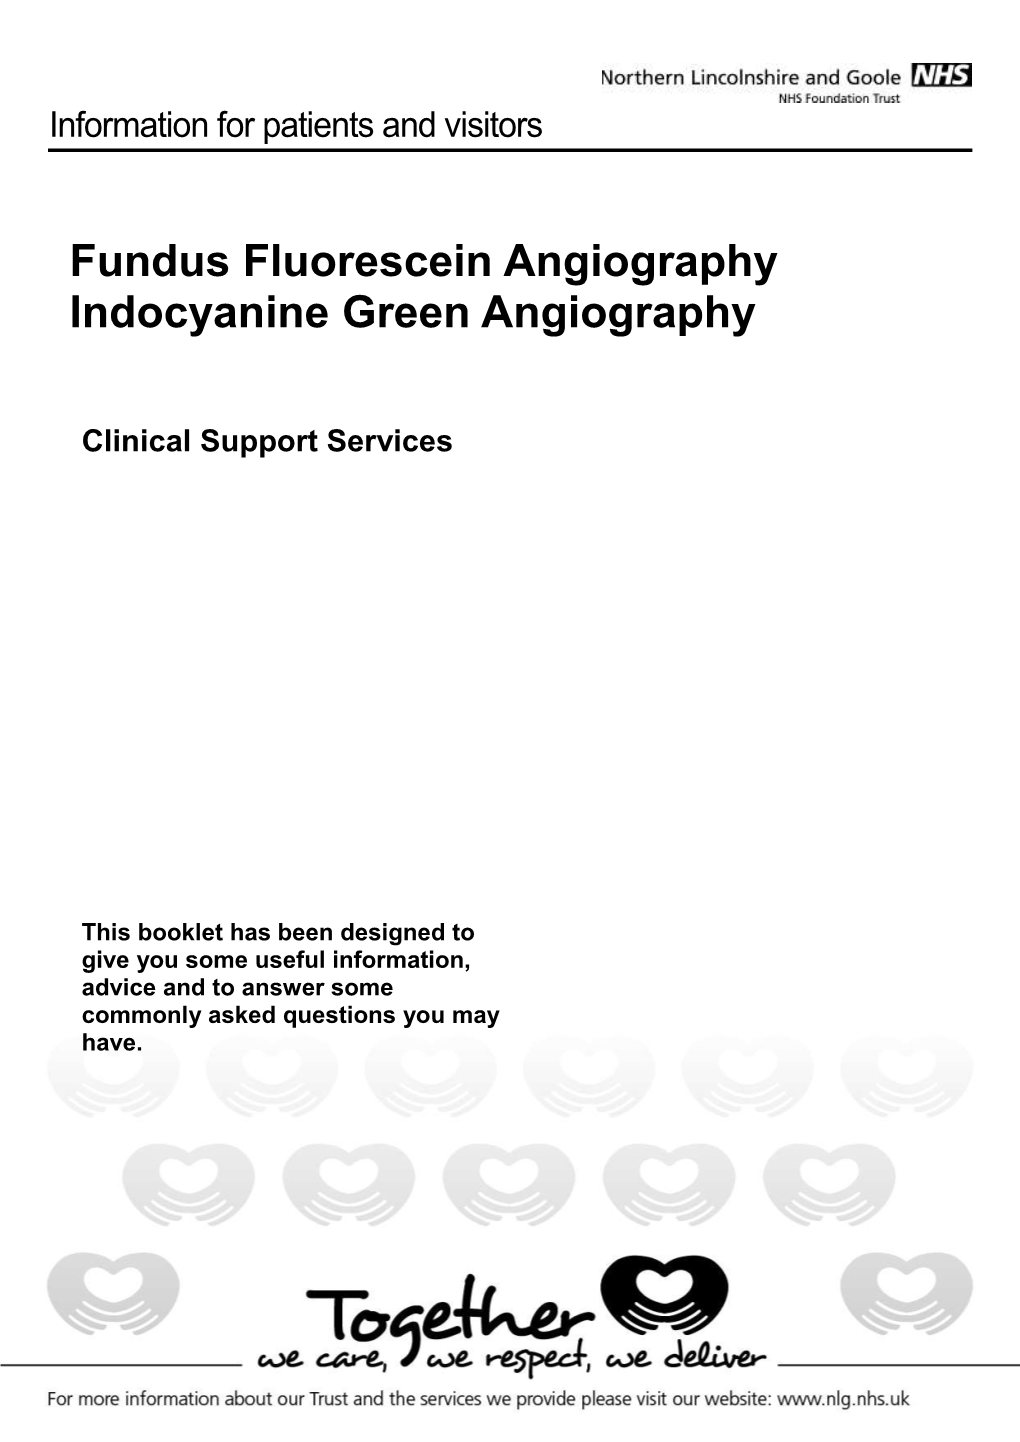 Fundus Fluorescein Angiography Indocyanine Green Angiography